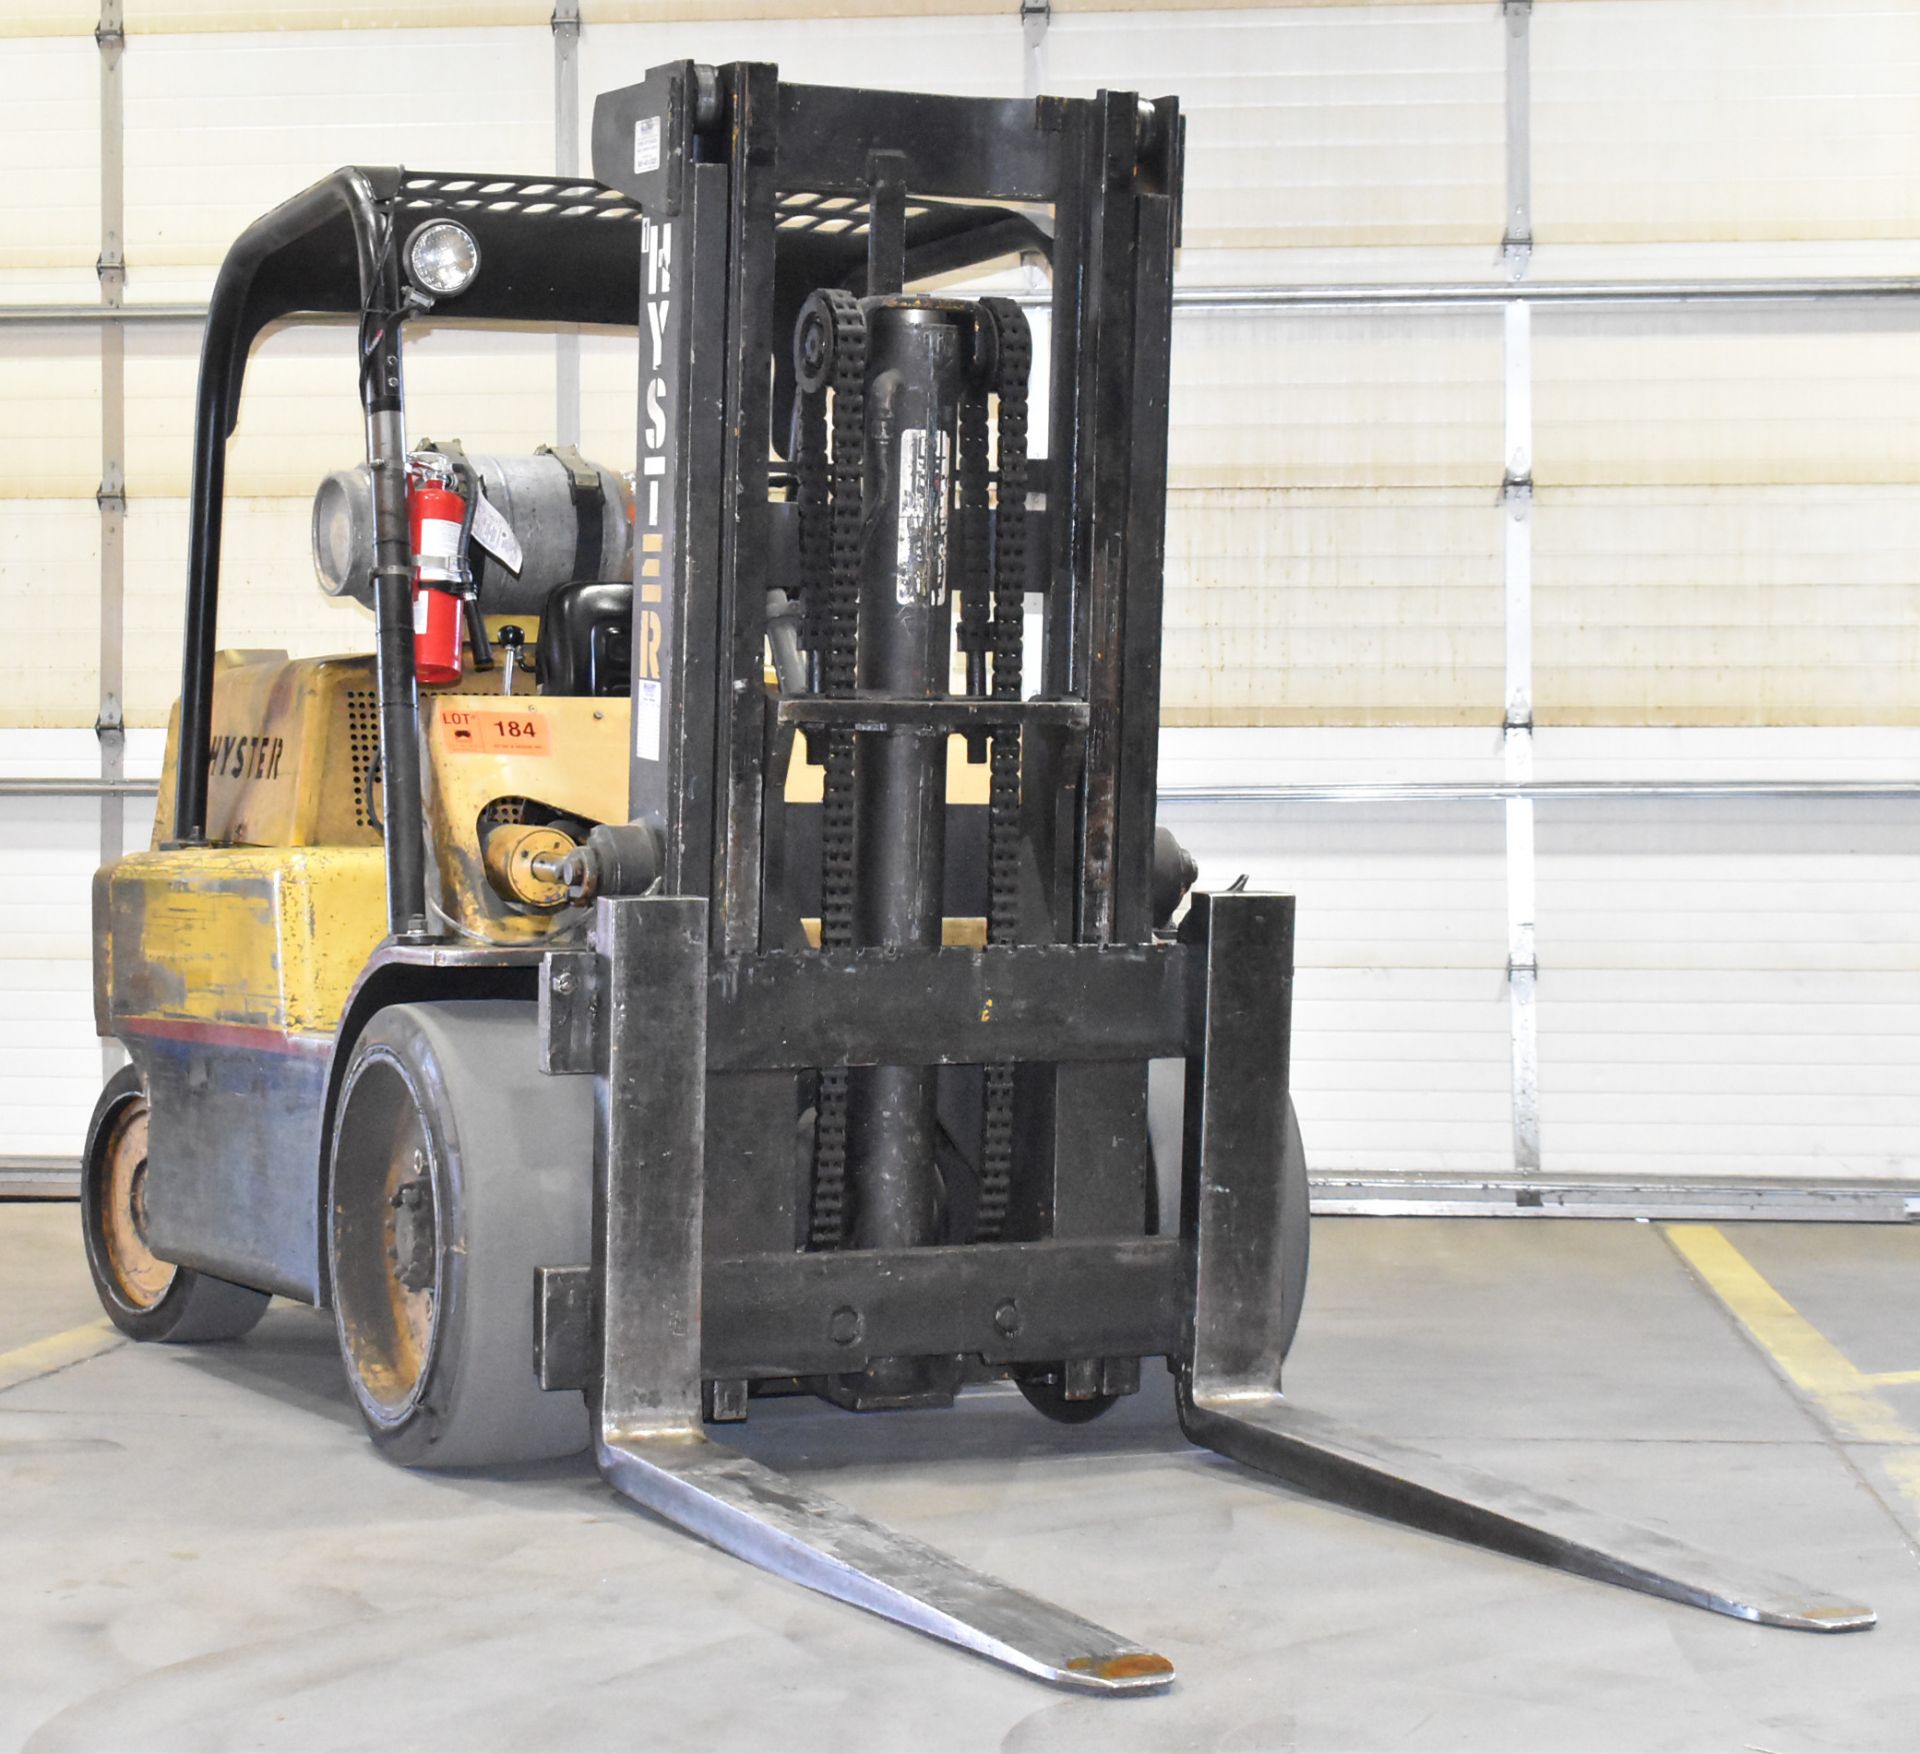 HYSTER S150A 15,000 LB. CAPACITY LPG FORKLIFT WITH 129" MAX. LIFT HEIGHT, 2-STAGE MAST, SOLID TIRES,